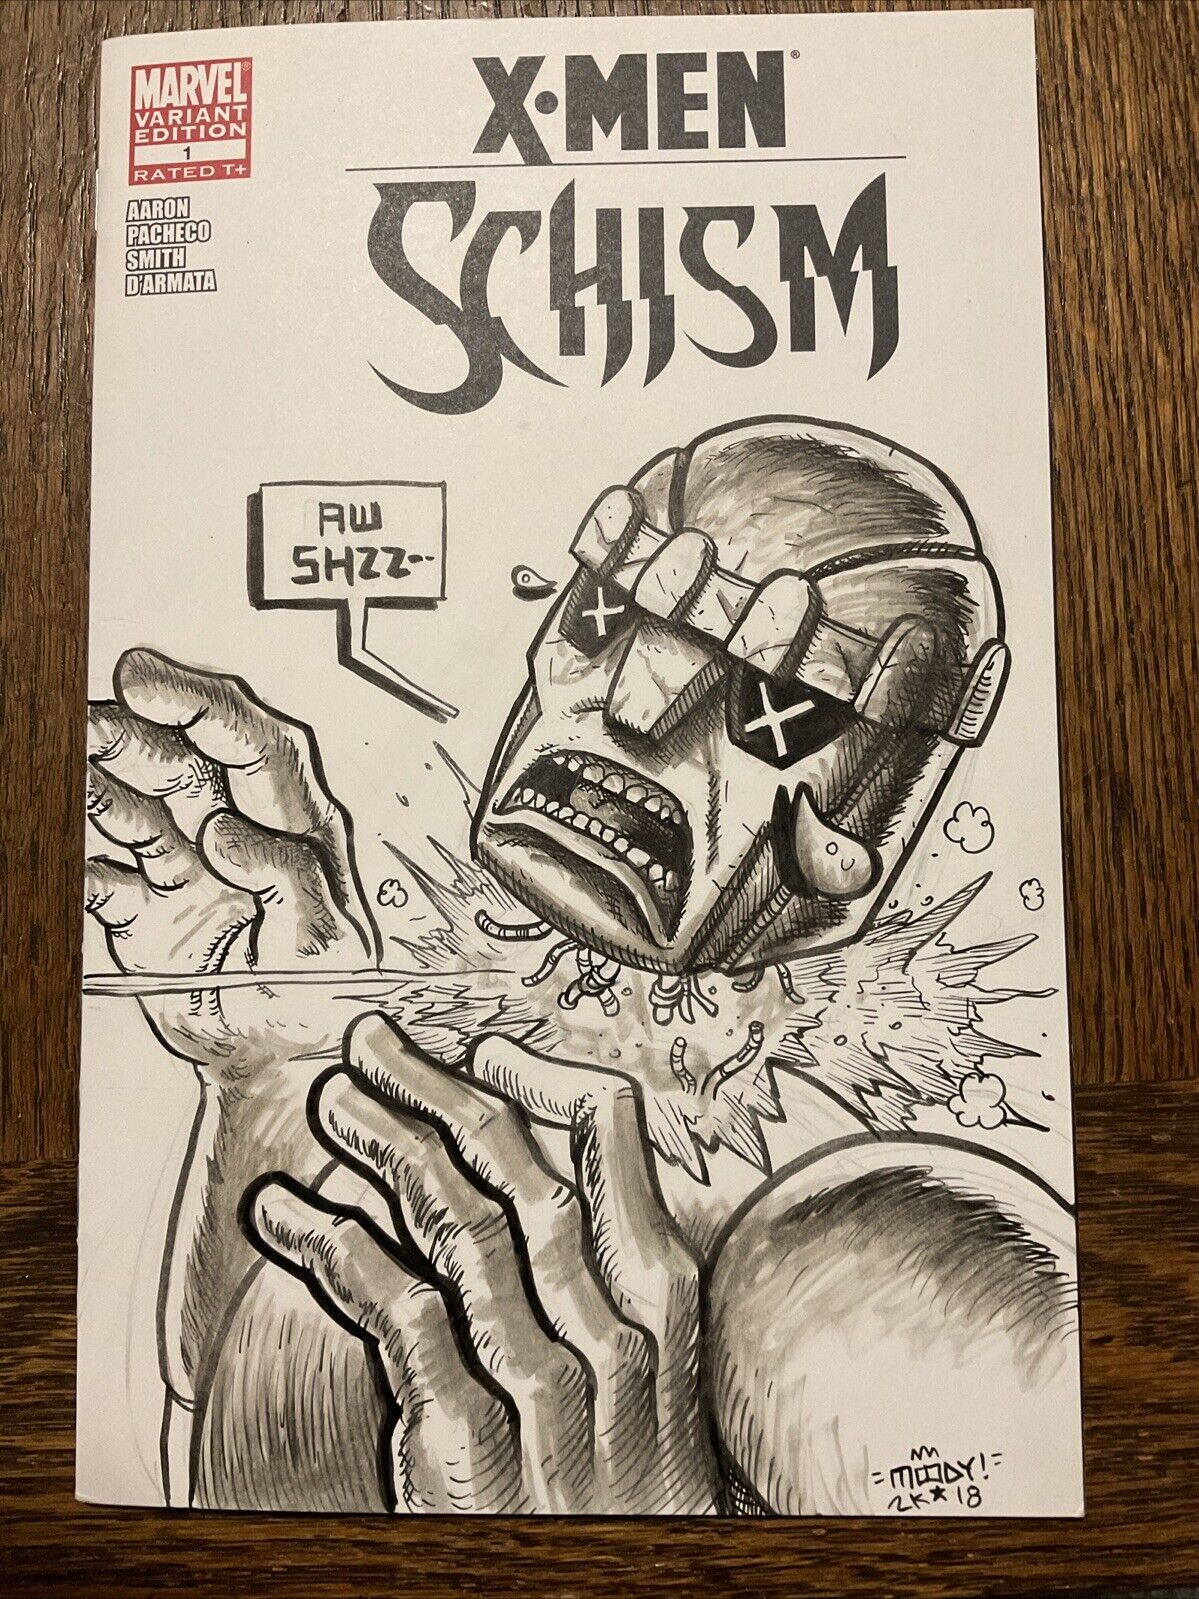 Xmen Schism Number 1 sketch cover with original art by Buster Moody, 2018